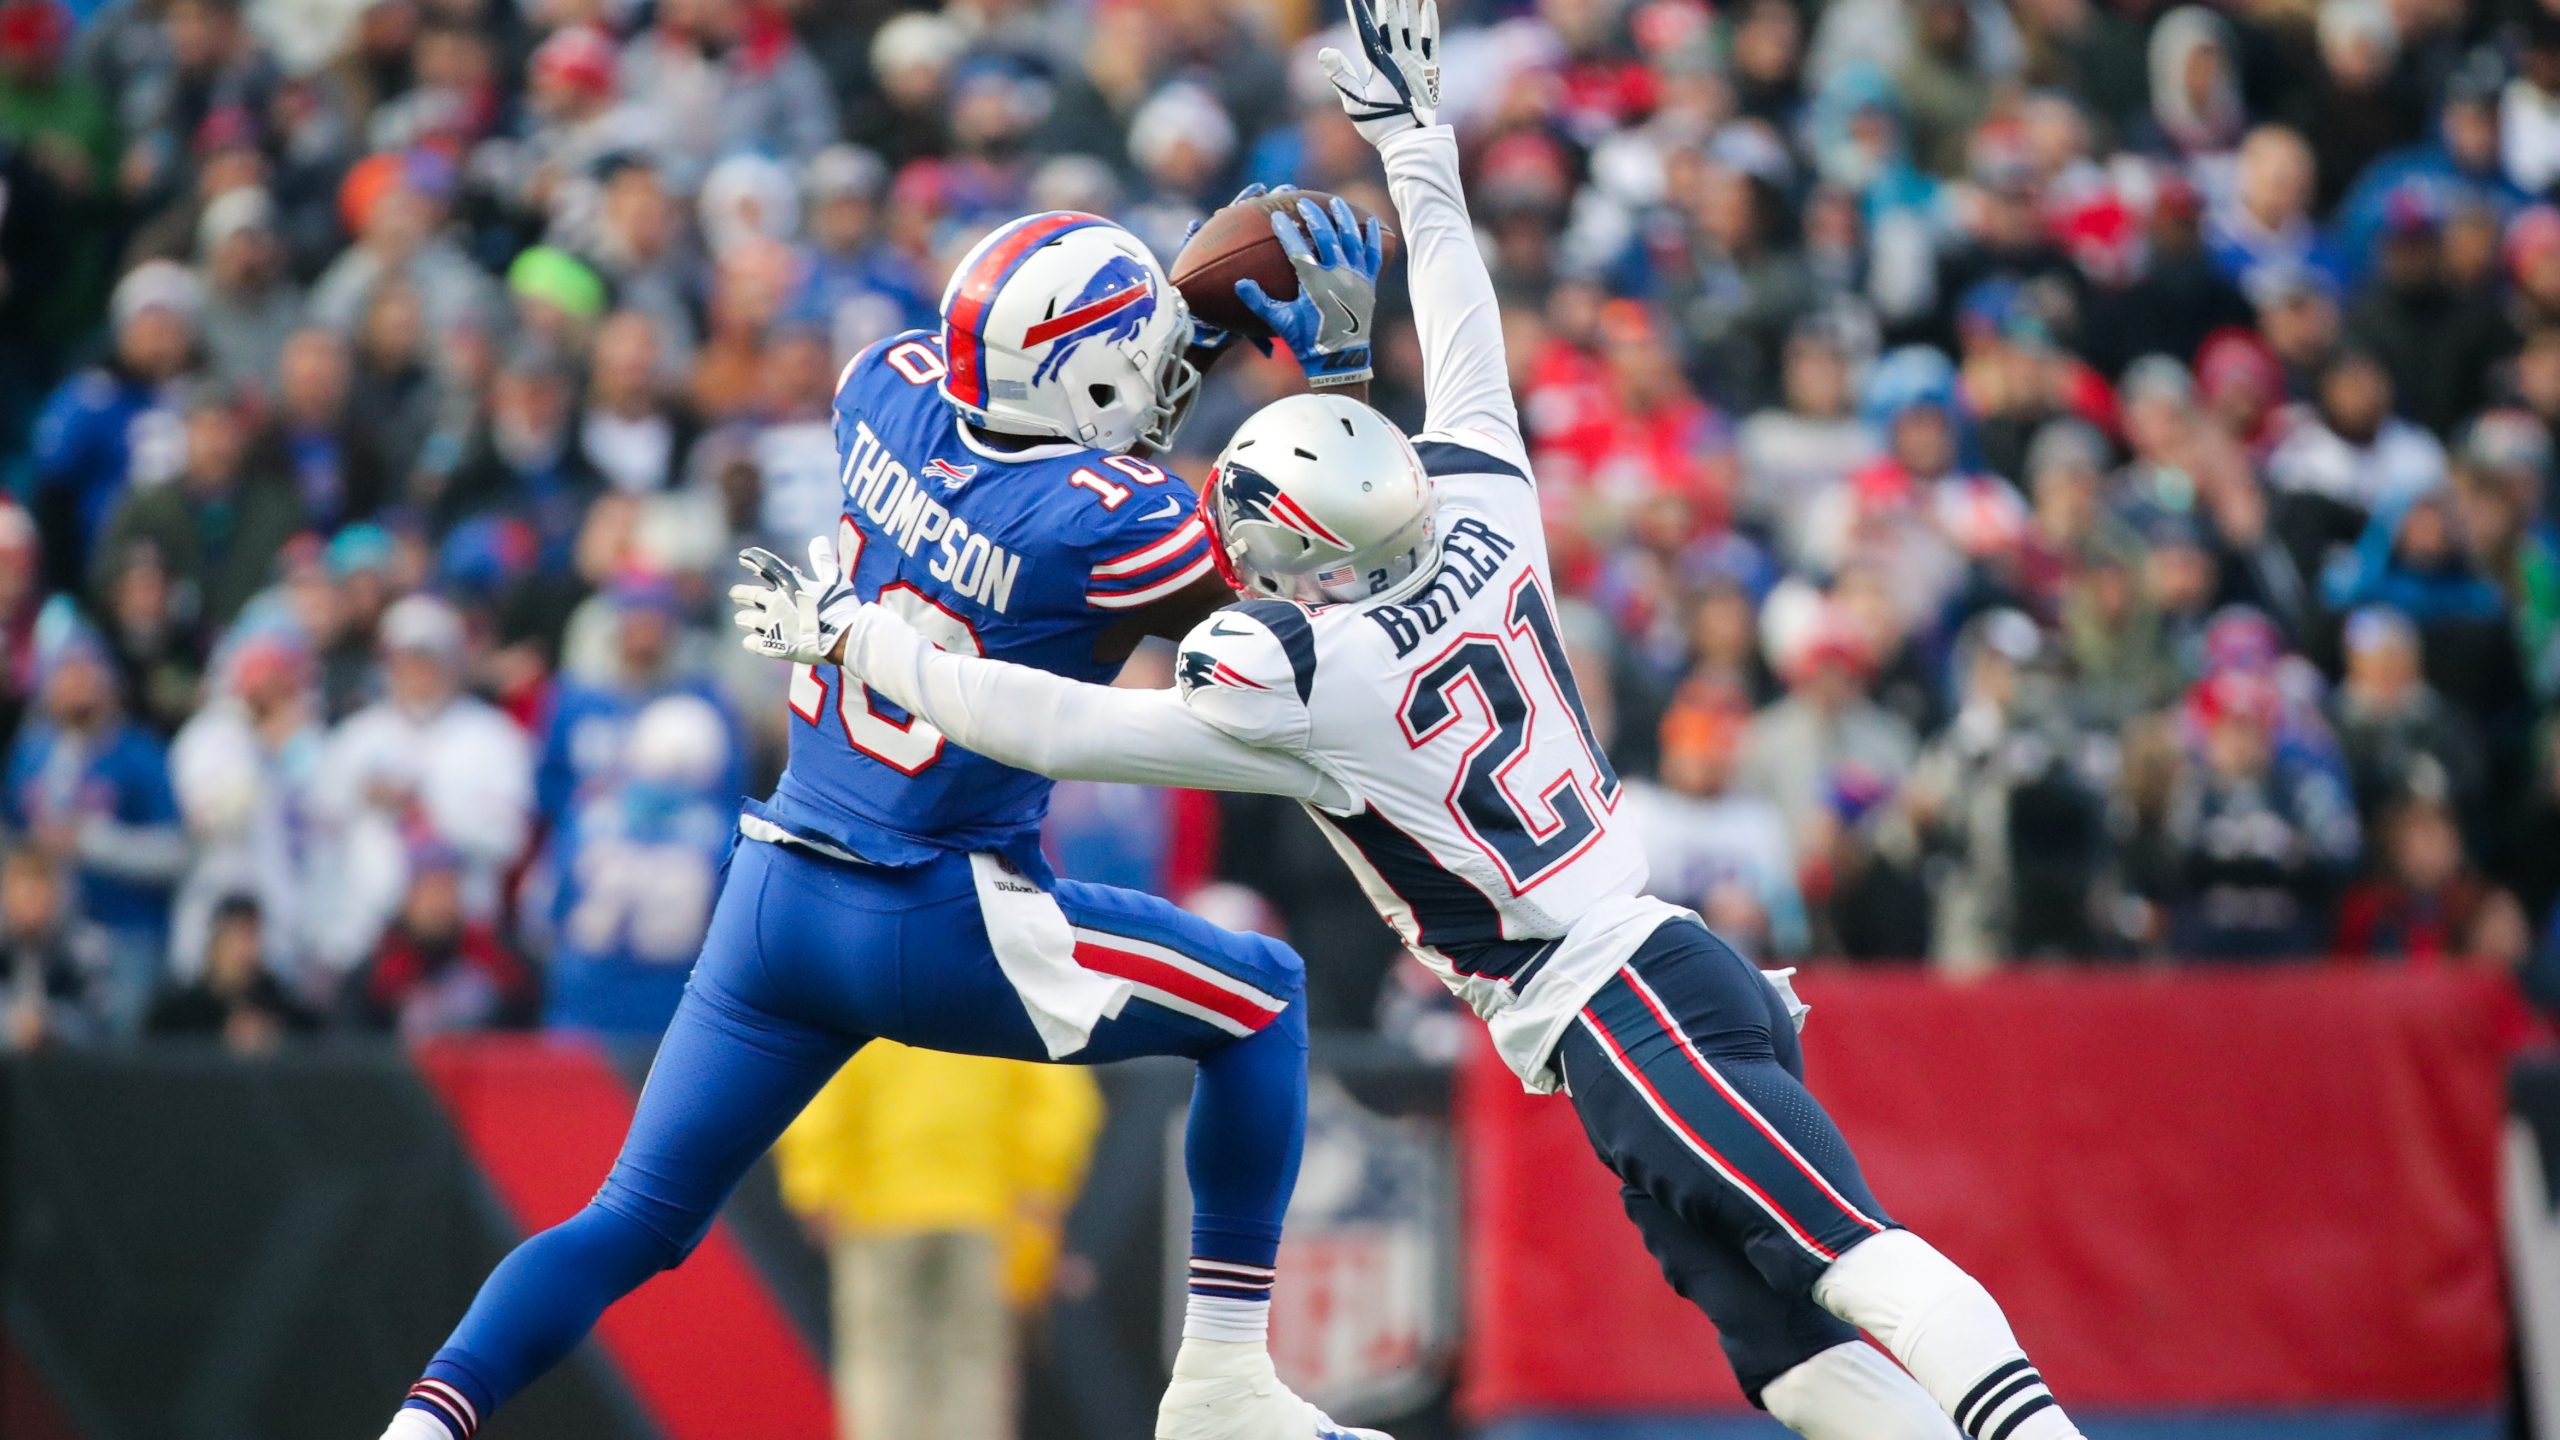 Bills vs Patriots Live Stream: How to Watch Without Cable